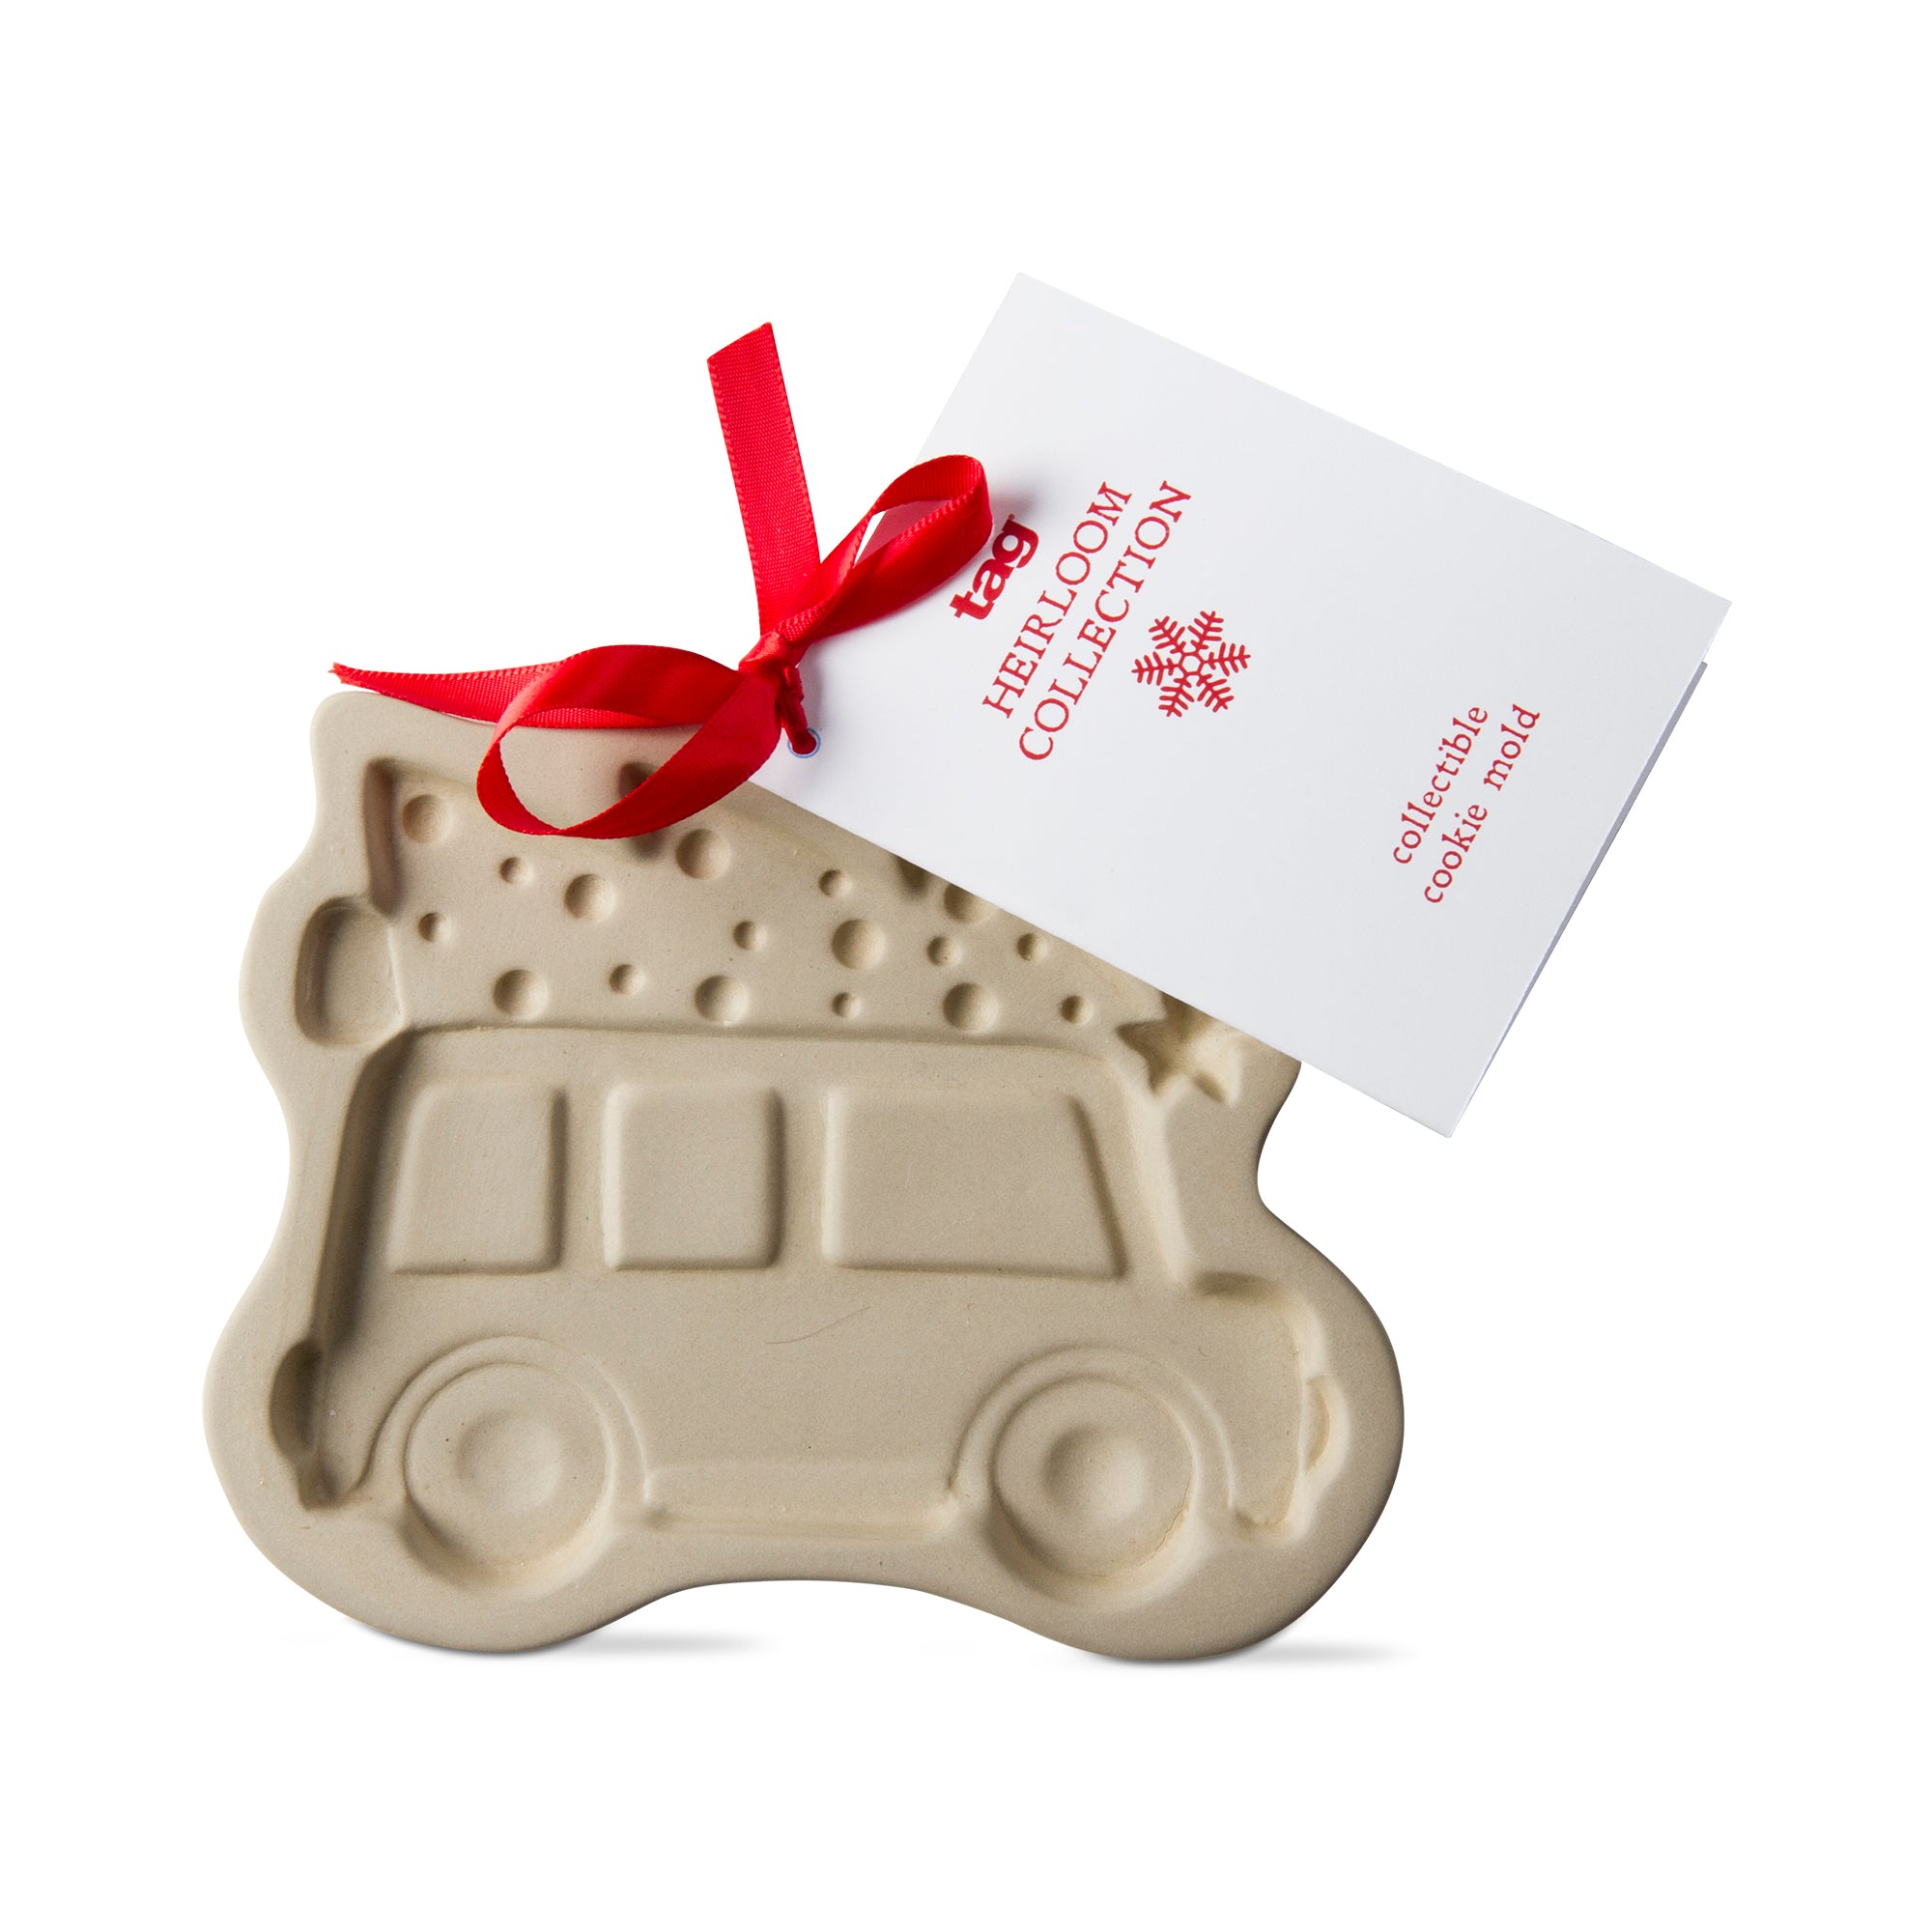 Stoneware Christmas Car with Tree Cookie Mold | Putti Christmas Baking 